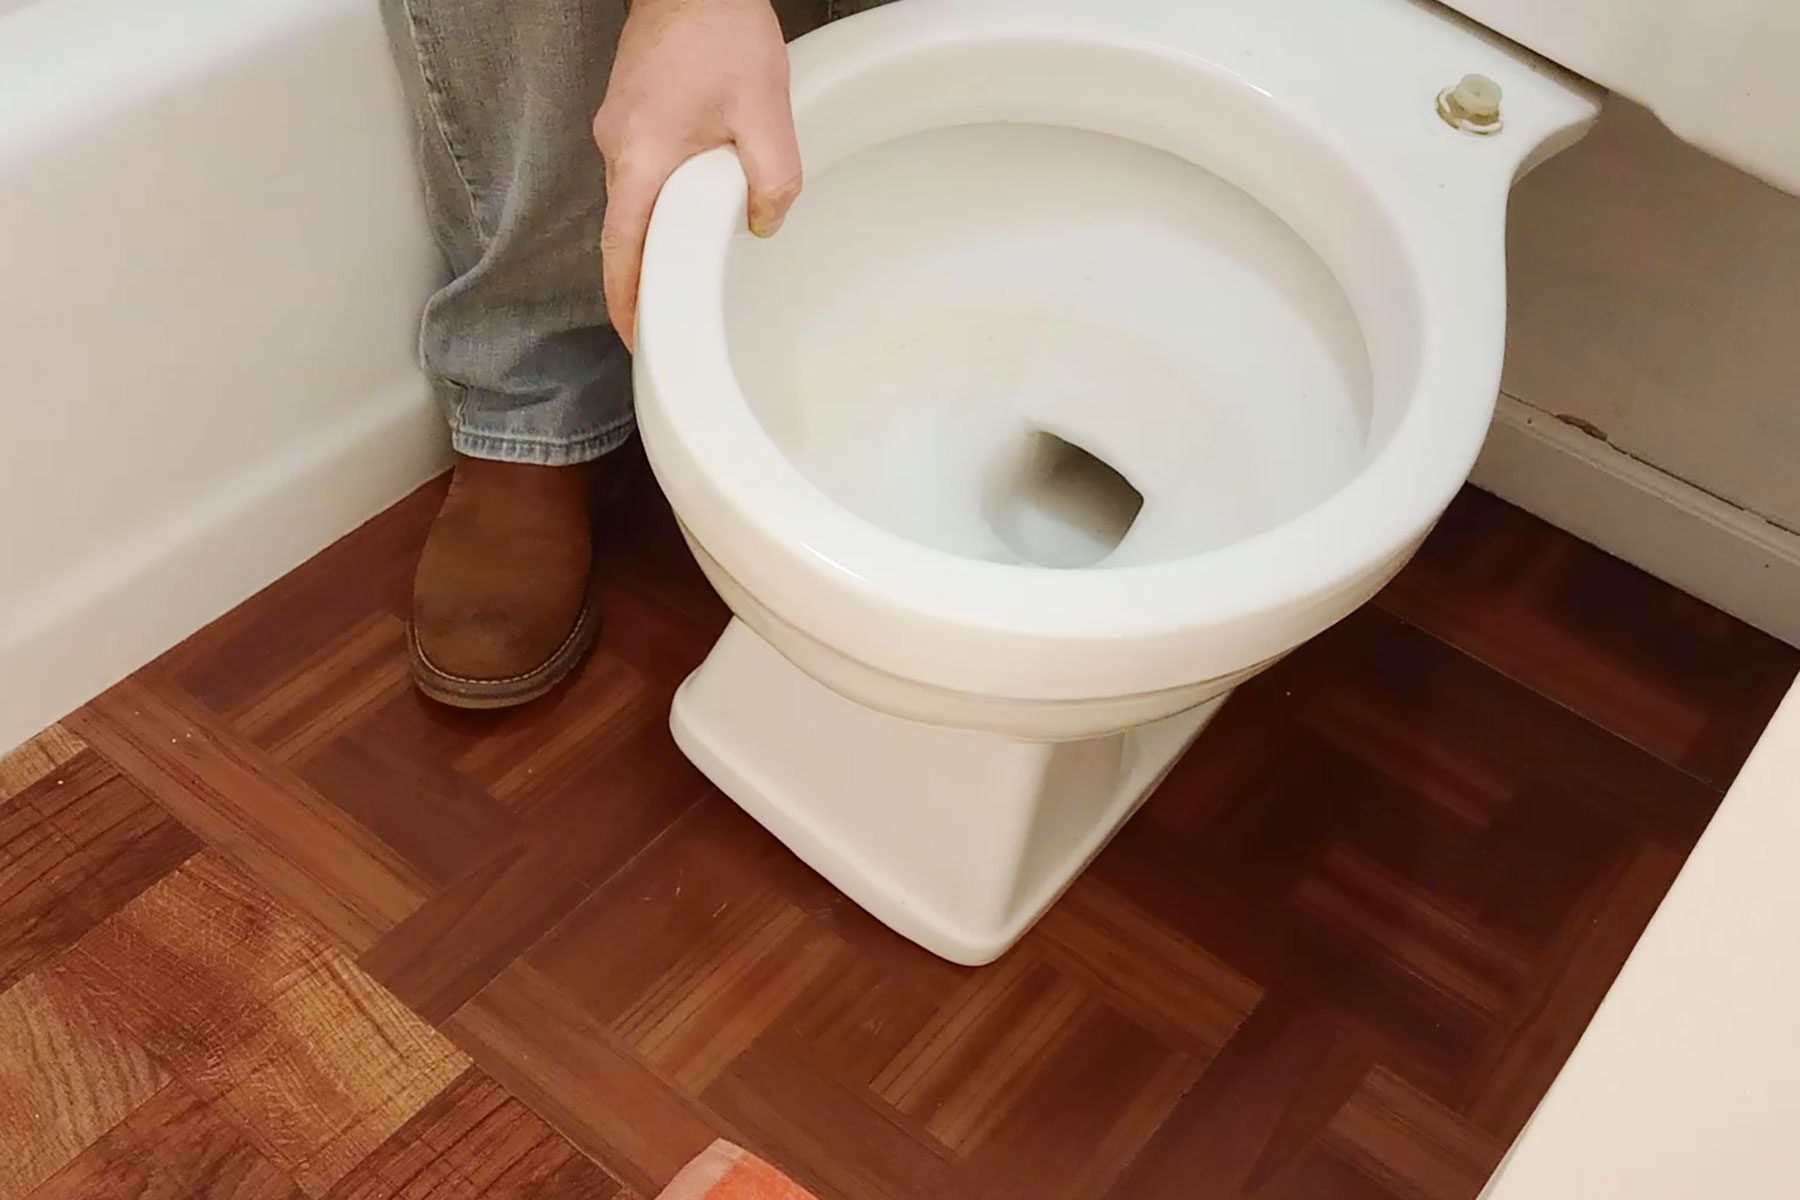 How Do I Know If a Toilet Wax Ring Is Bad? | Hunker